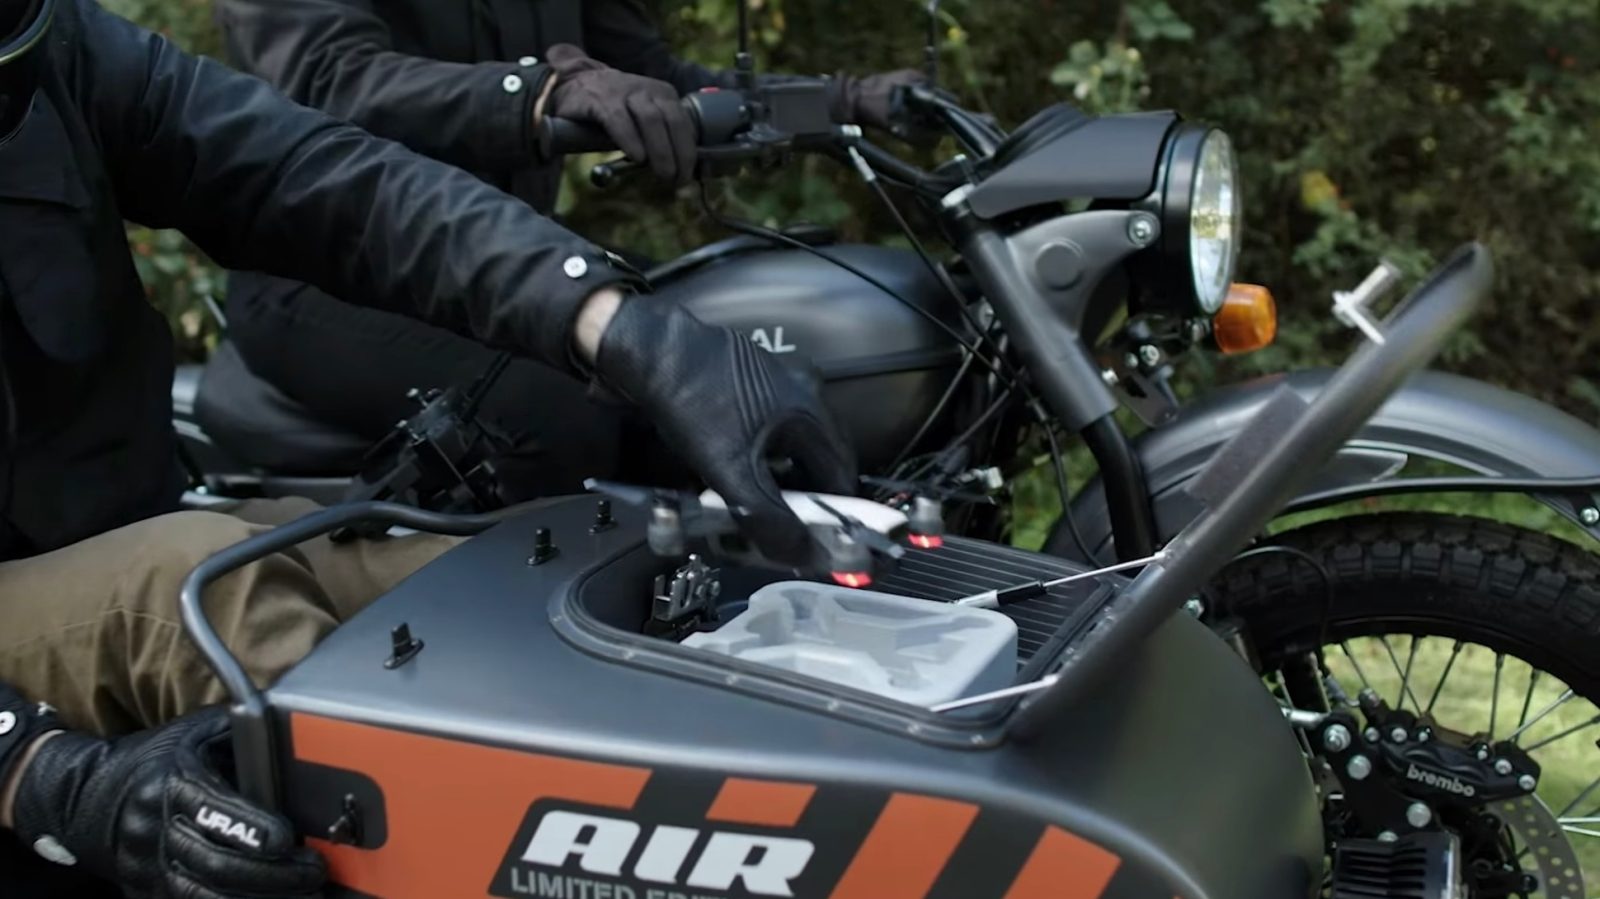 DroneRise - The Ural Air, a motorcycle with a DJI Spark integrated!